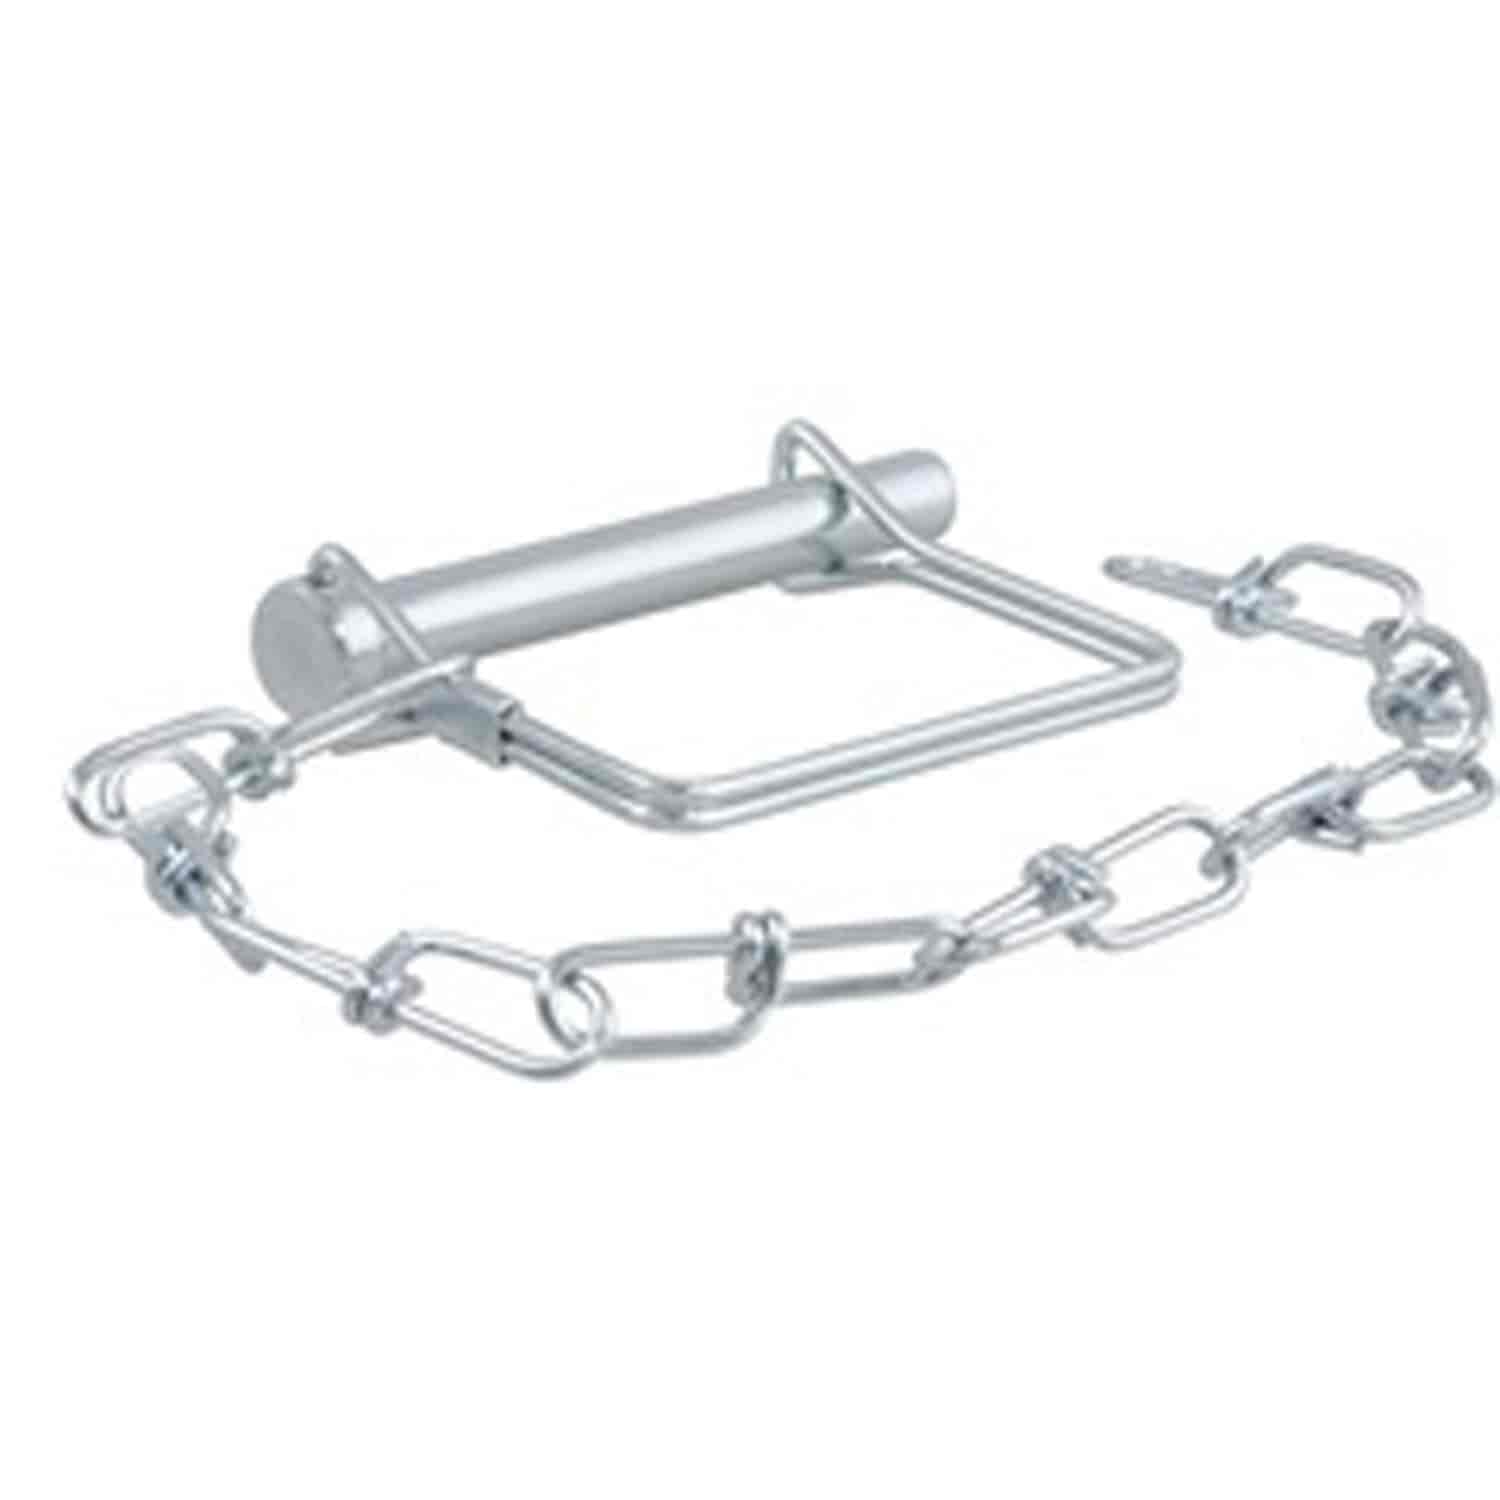 SAFETY PIN 3/8 WITH CHAIN BULK